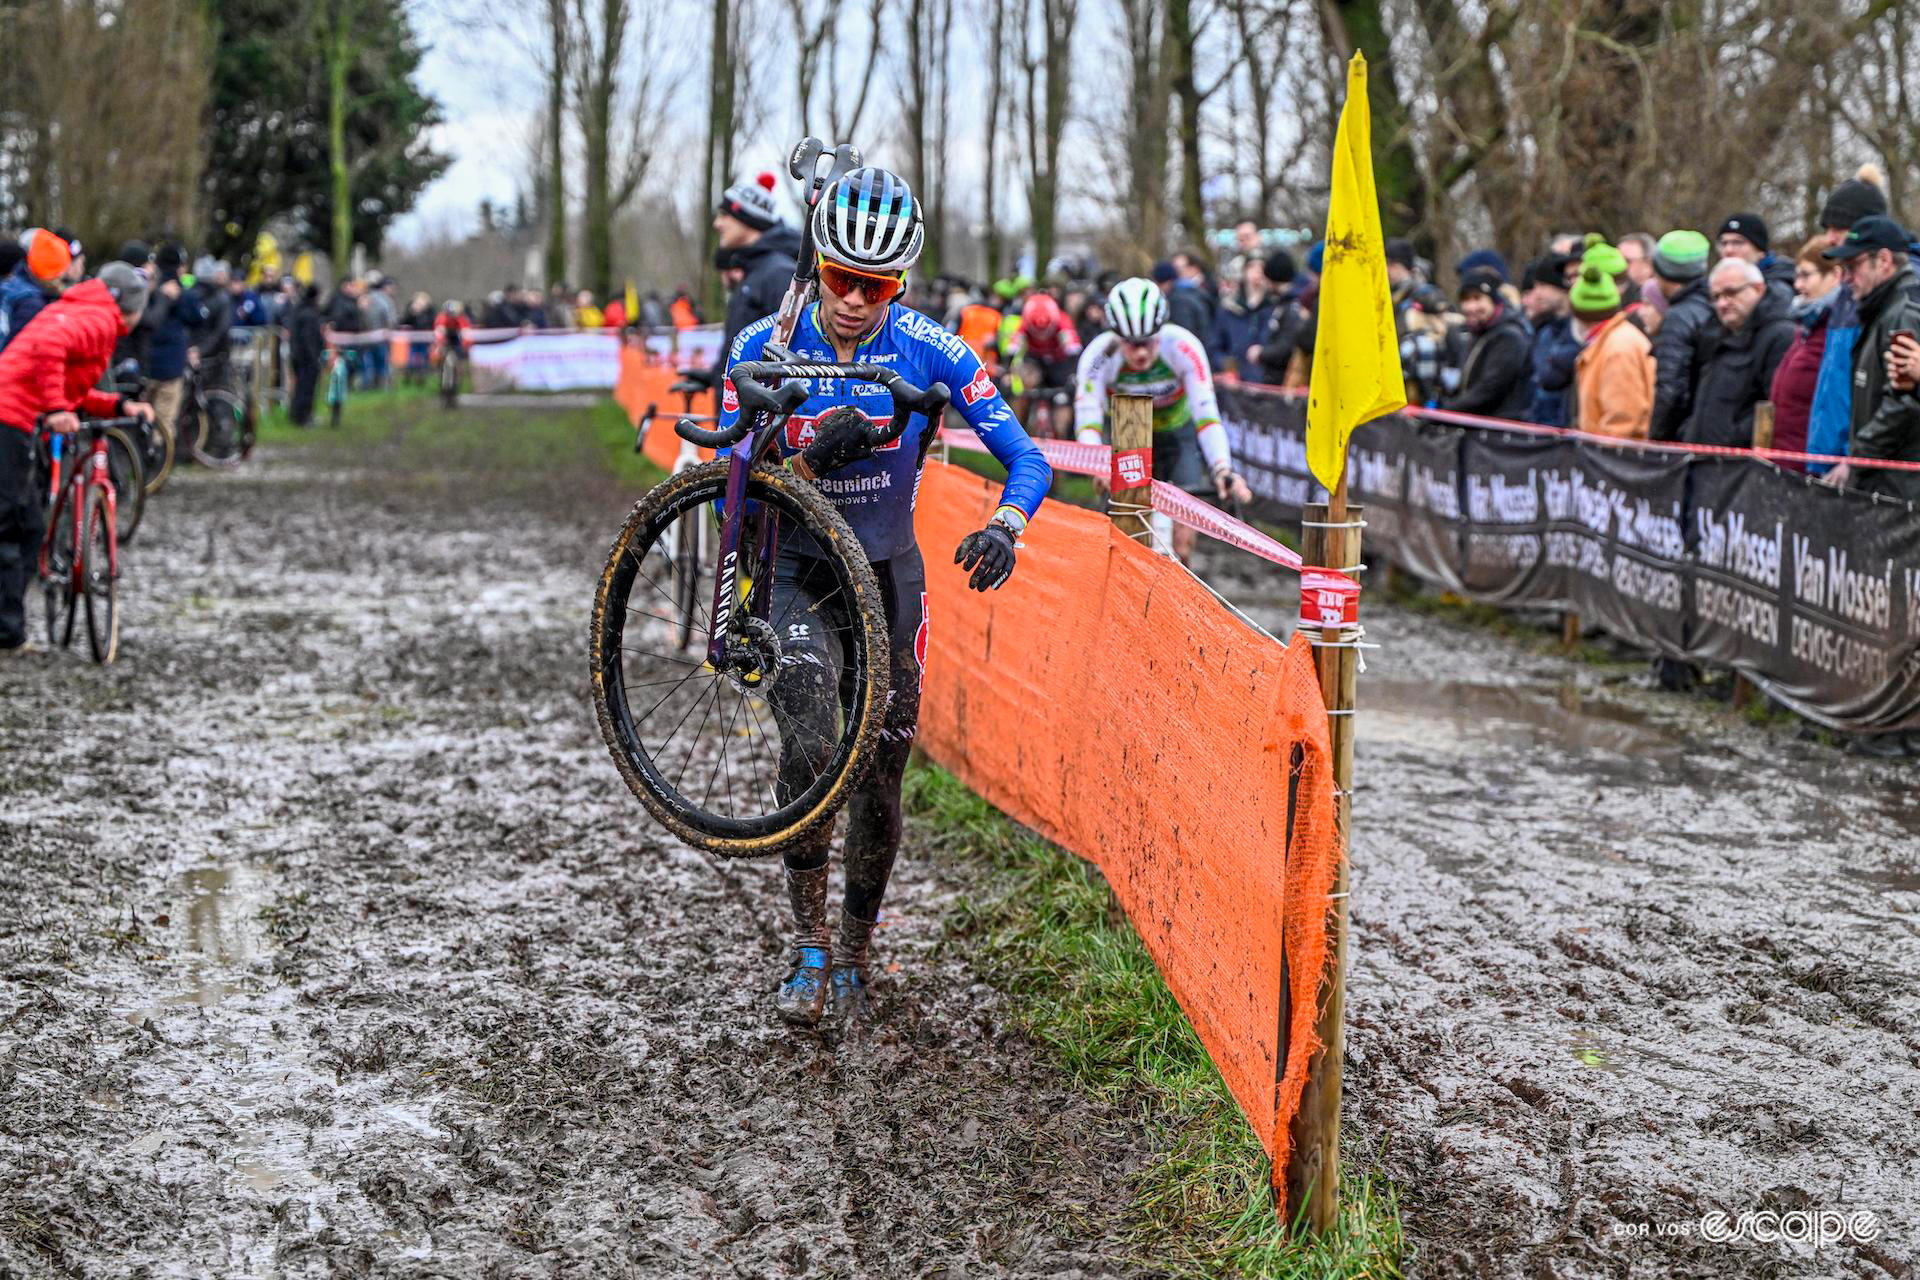 Ceylin del Carmen Alvarado leaves the pits carrying her bike during Hexia Cyclocross Gullegem.